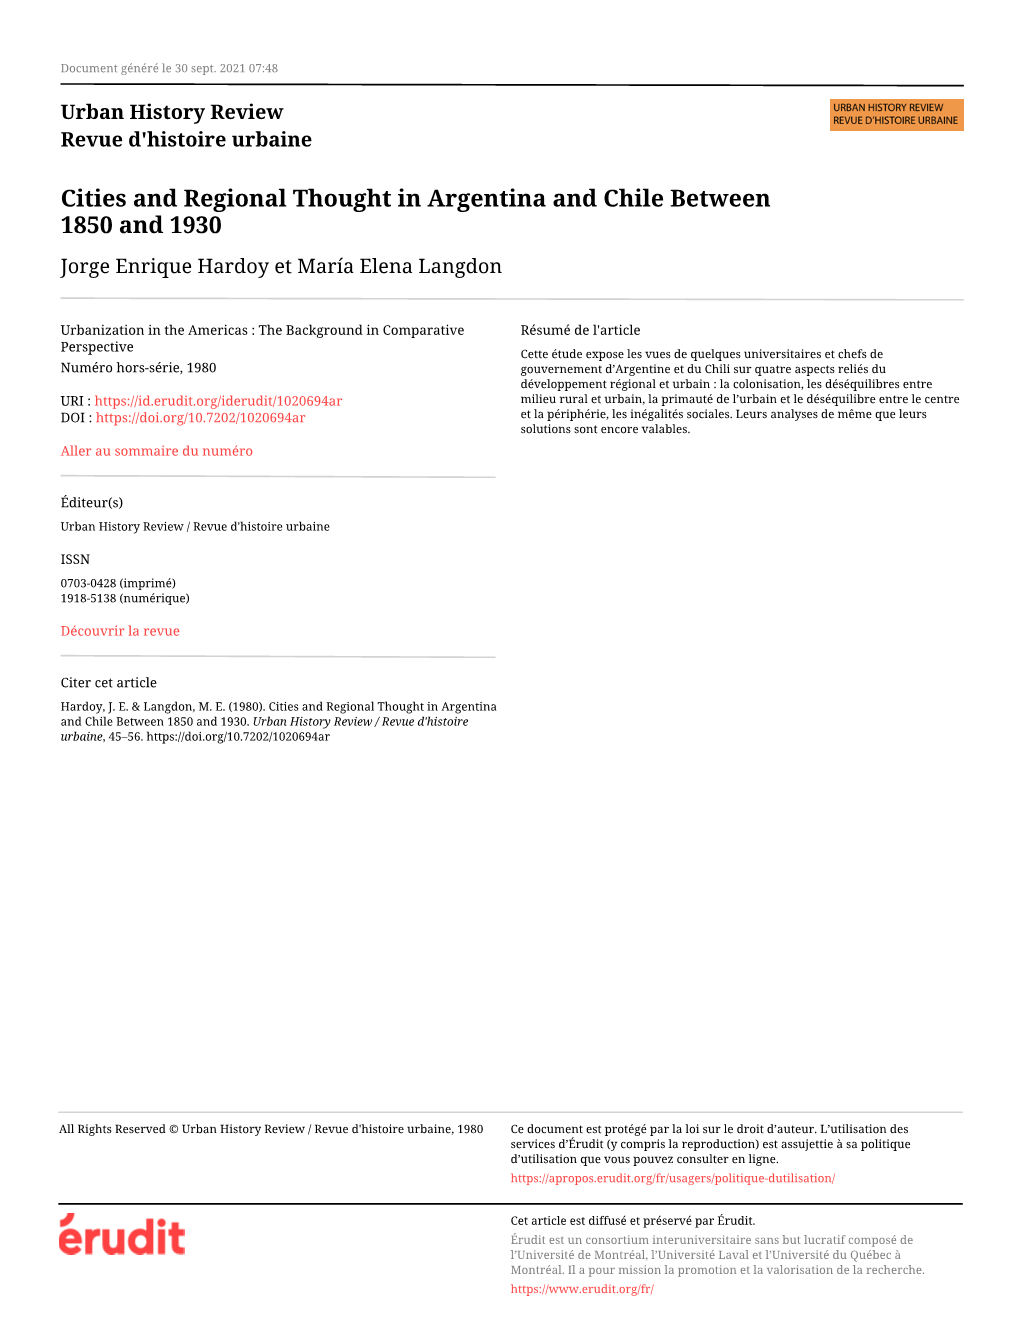 Cities and Regional Thought in Argentina and Chile Between 1850 and 1930 Jorge Enrique Hardoy Et María Elena Langdon